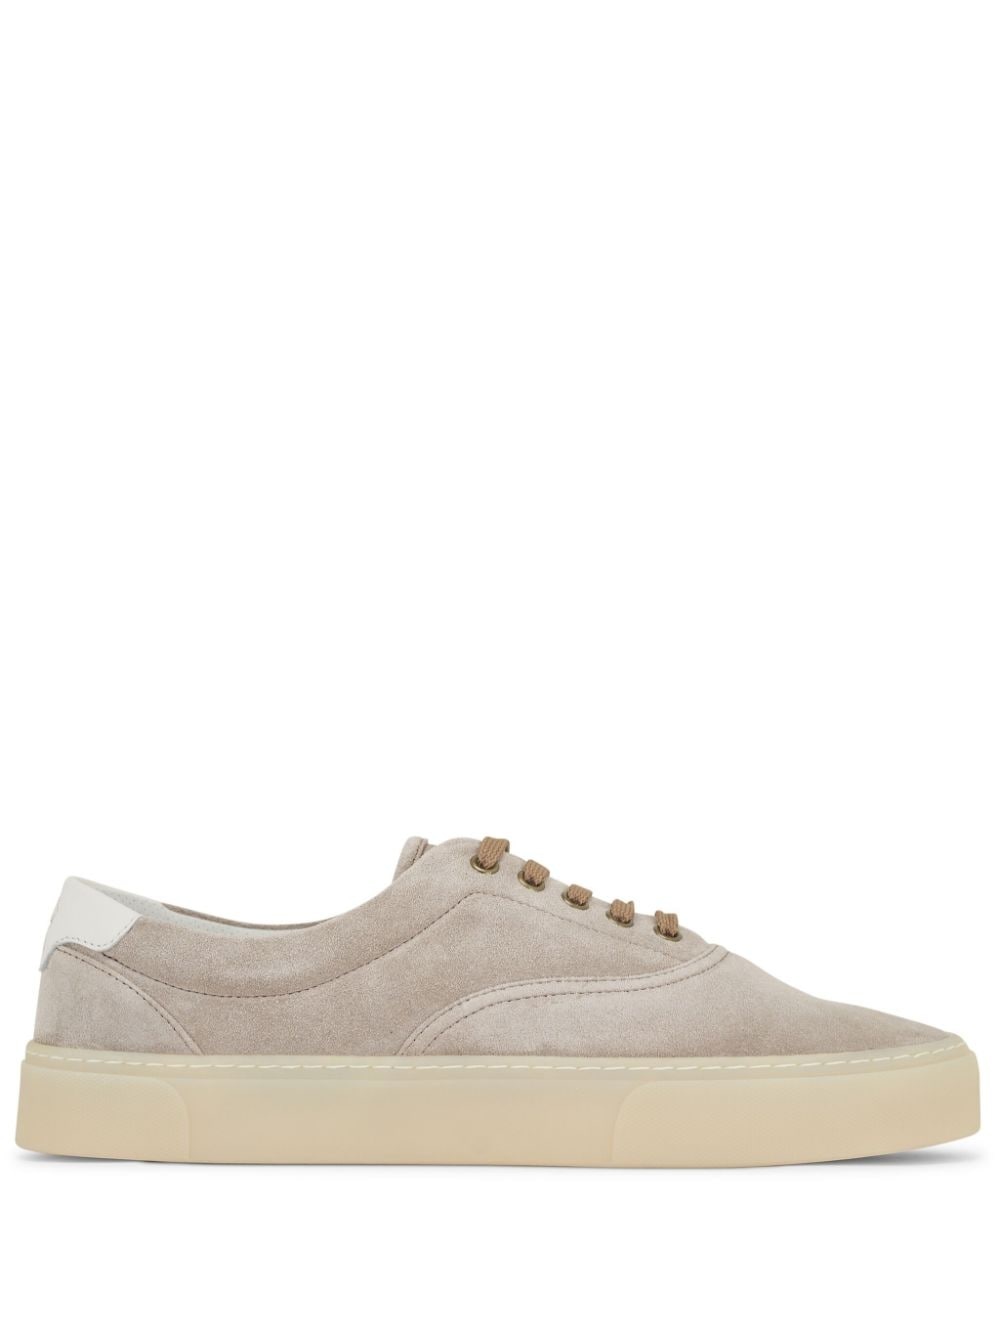 Cavalry suede sneakers - 1